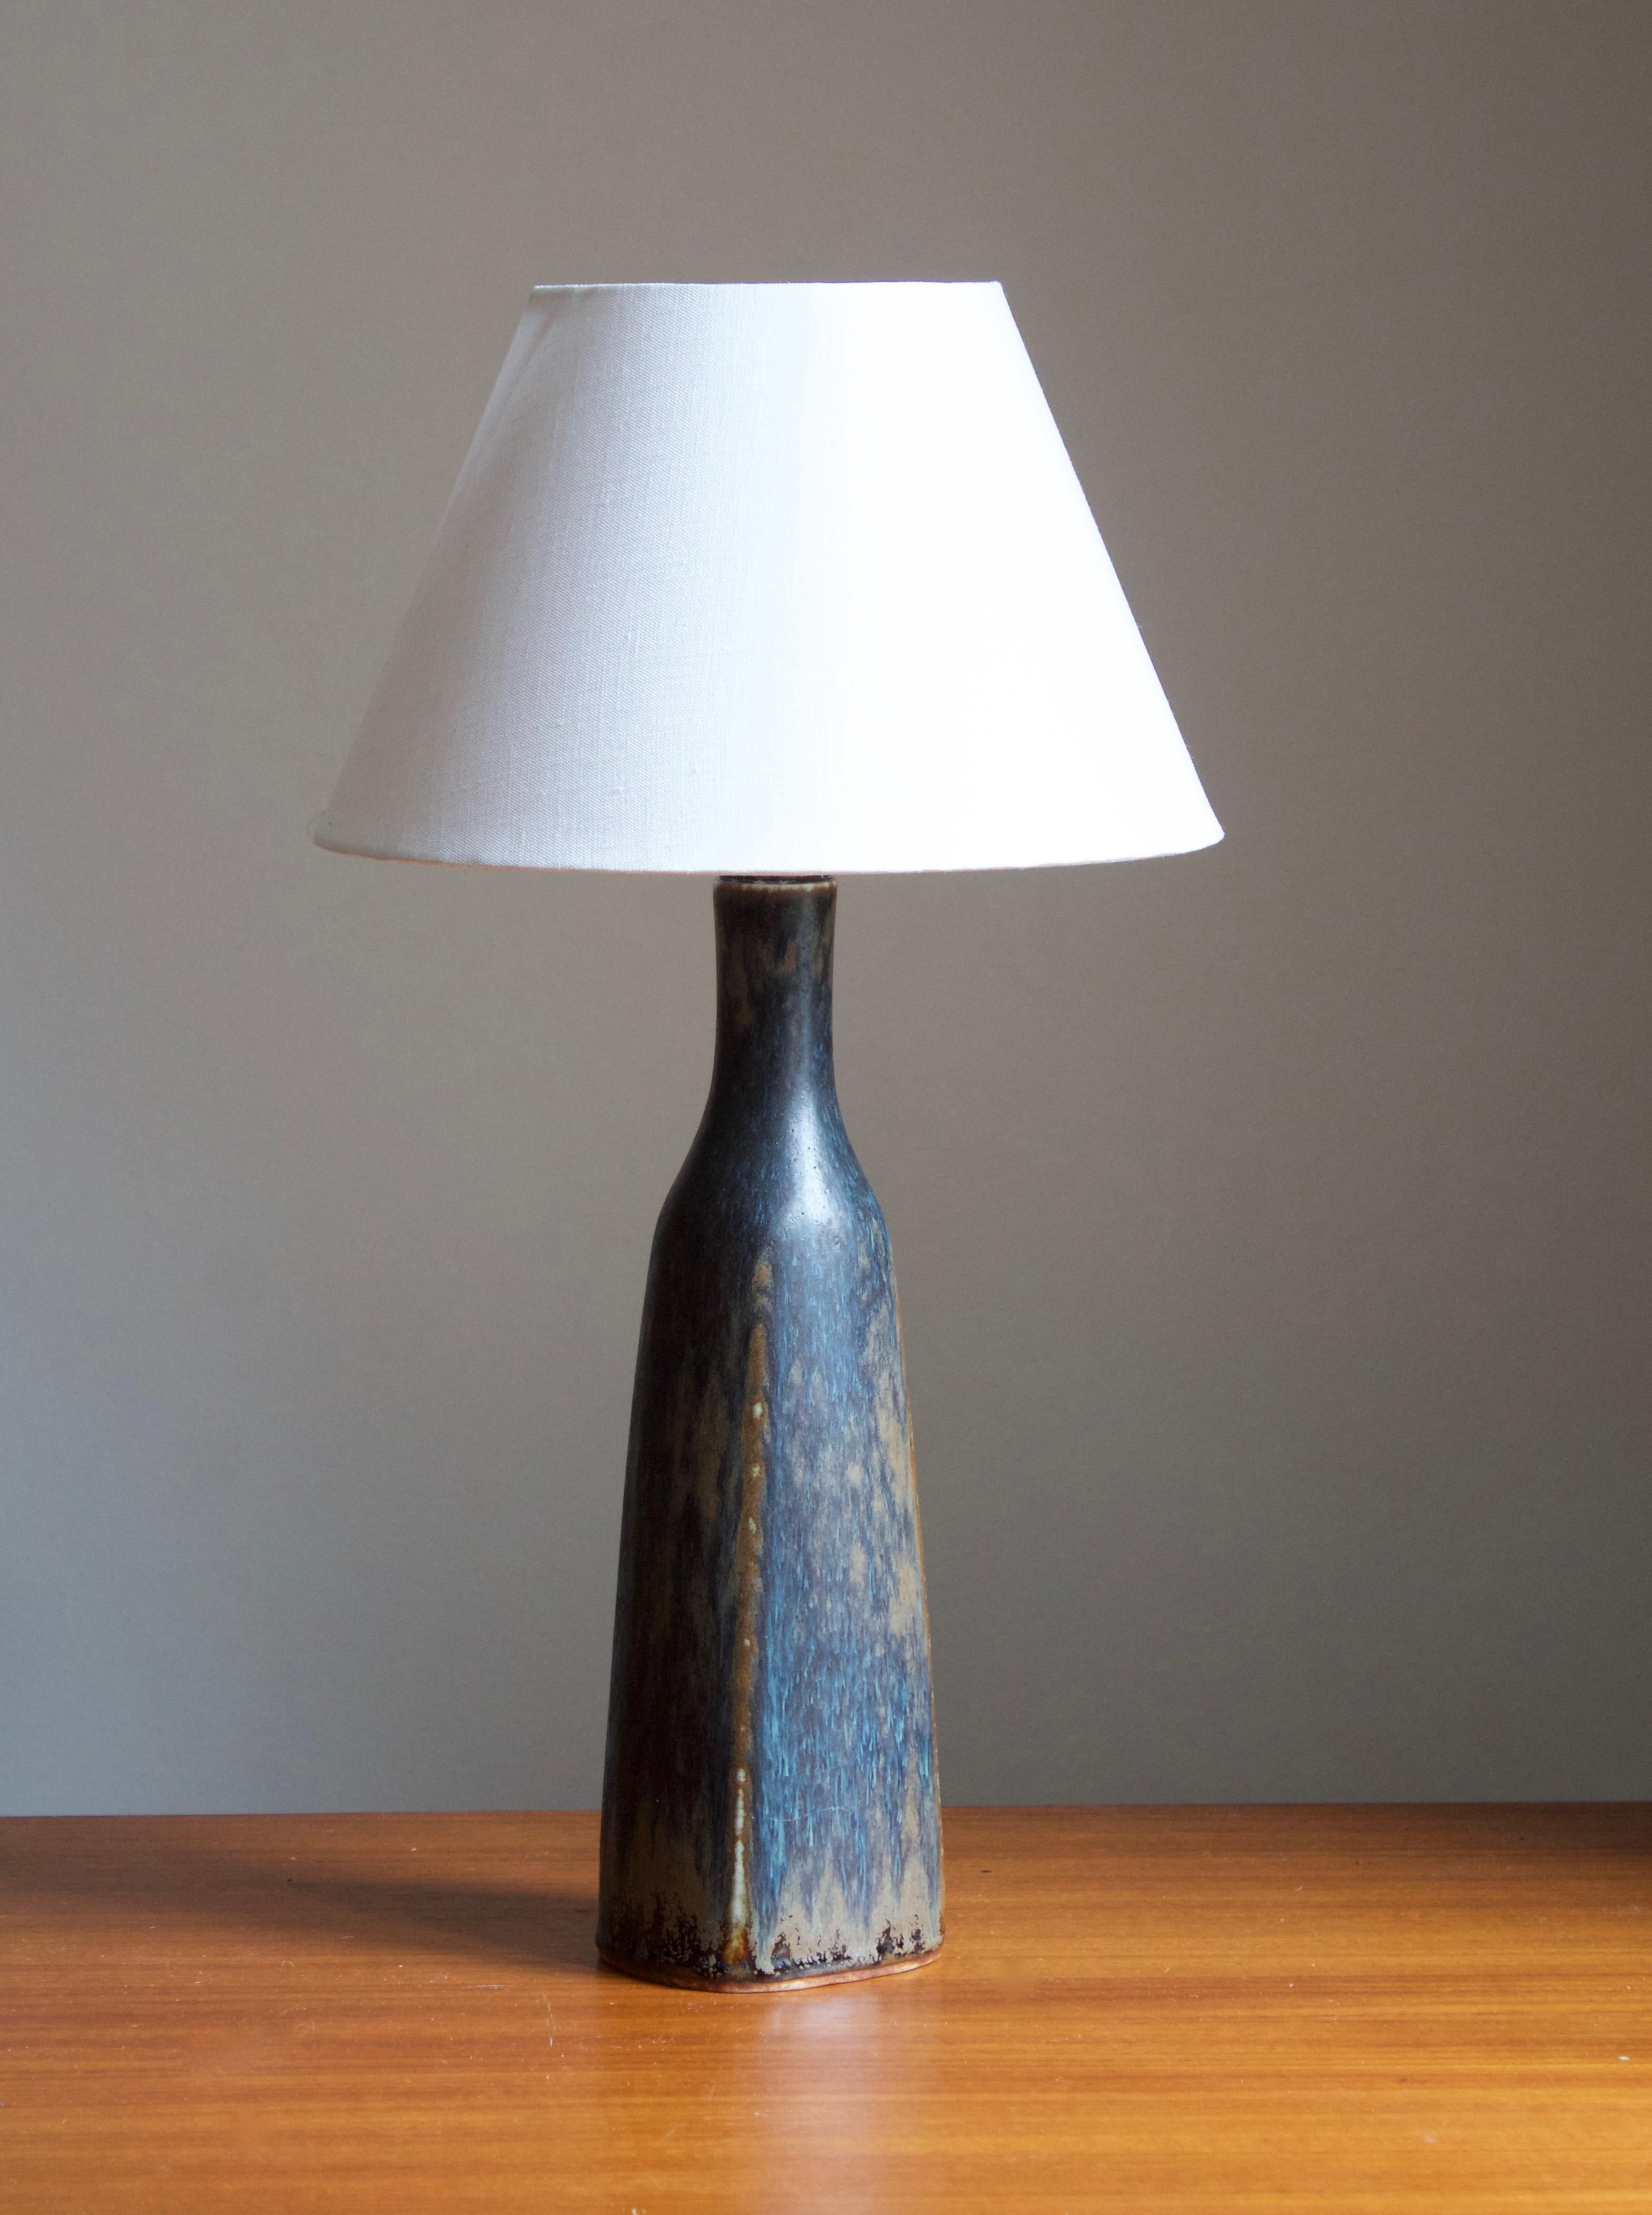 A table lamp by Carl-Harry Stålhane for the iconic Swedish firm Rörstrand. 

Stated dimensions exclude lampshade. Height includes socket. Sold without lampshade.

Glaze features brown-blue colors.

Other ceramicists of the period include Berndt